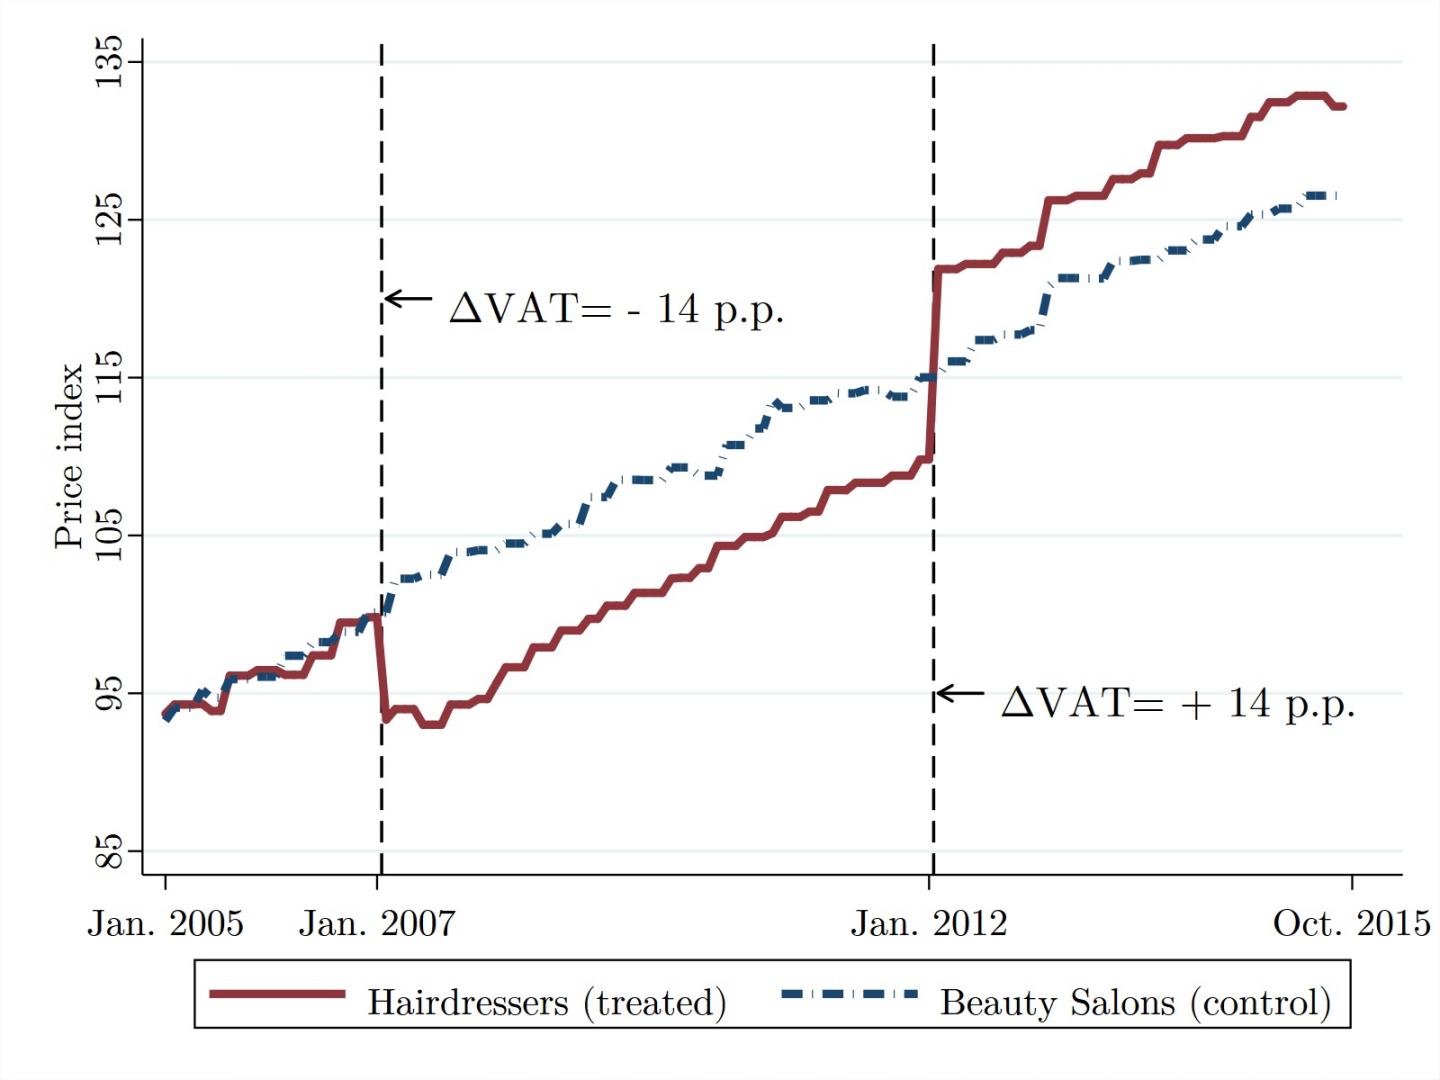 Impact of VAT changes on the consumer price index for hairdressing services